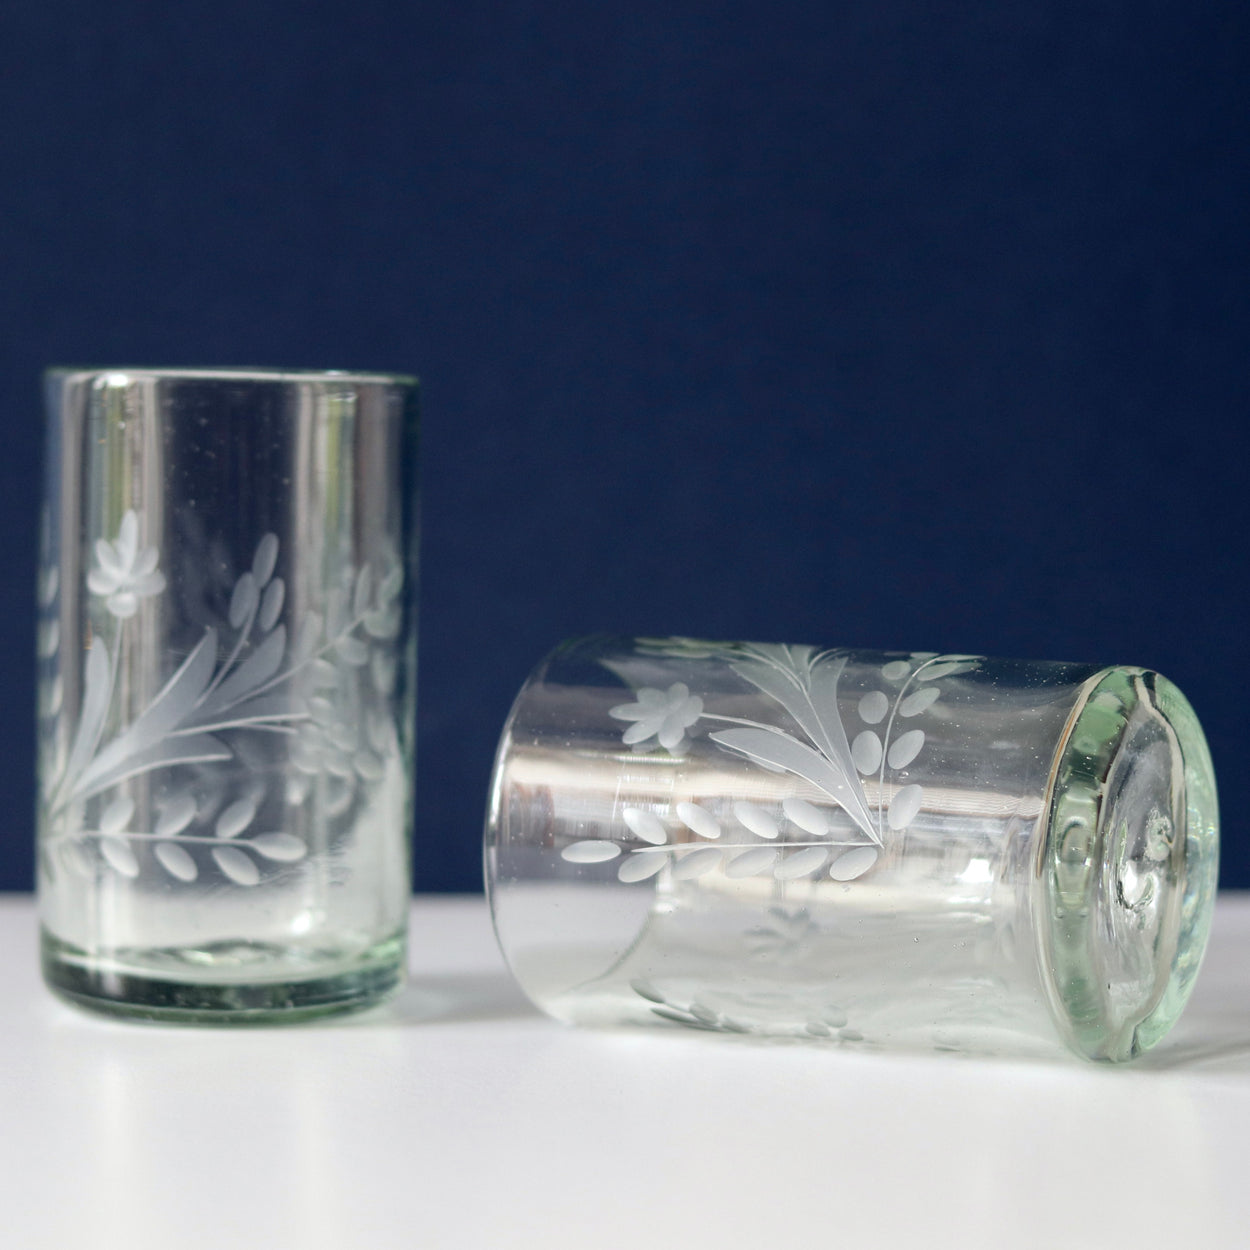 Hand blown etched glass tumbler with blue and white background. One upright ,one lying on it's side.